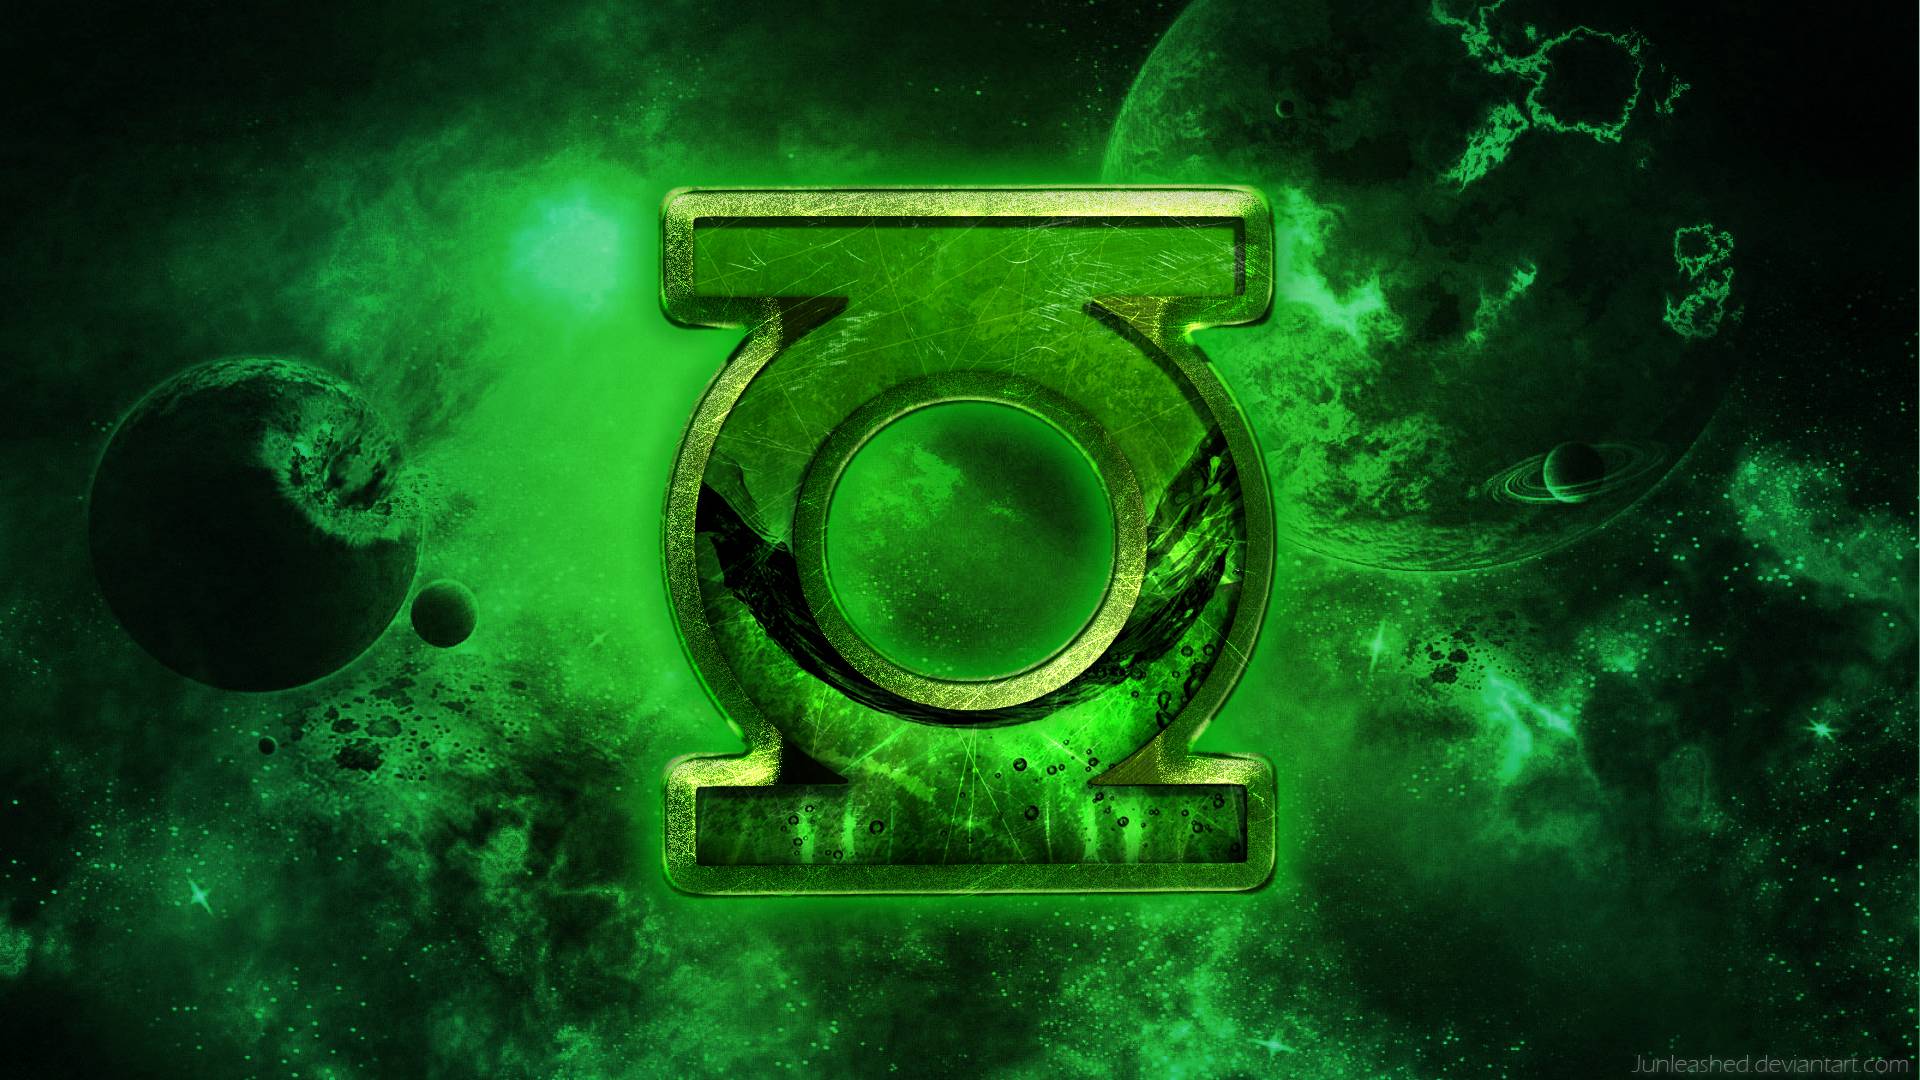 Download The iconic symbol of willpower and courage from the Green Lantern  Wallpaper  Wallpaperscom